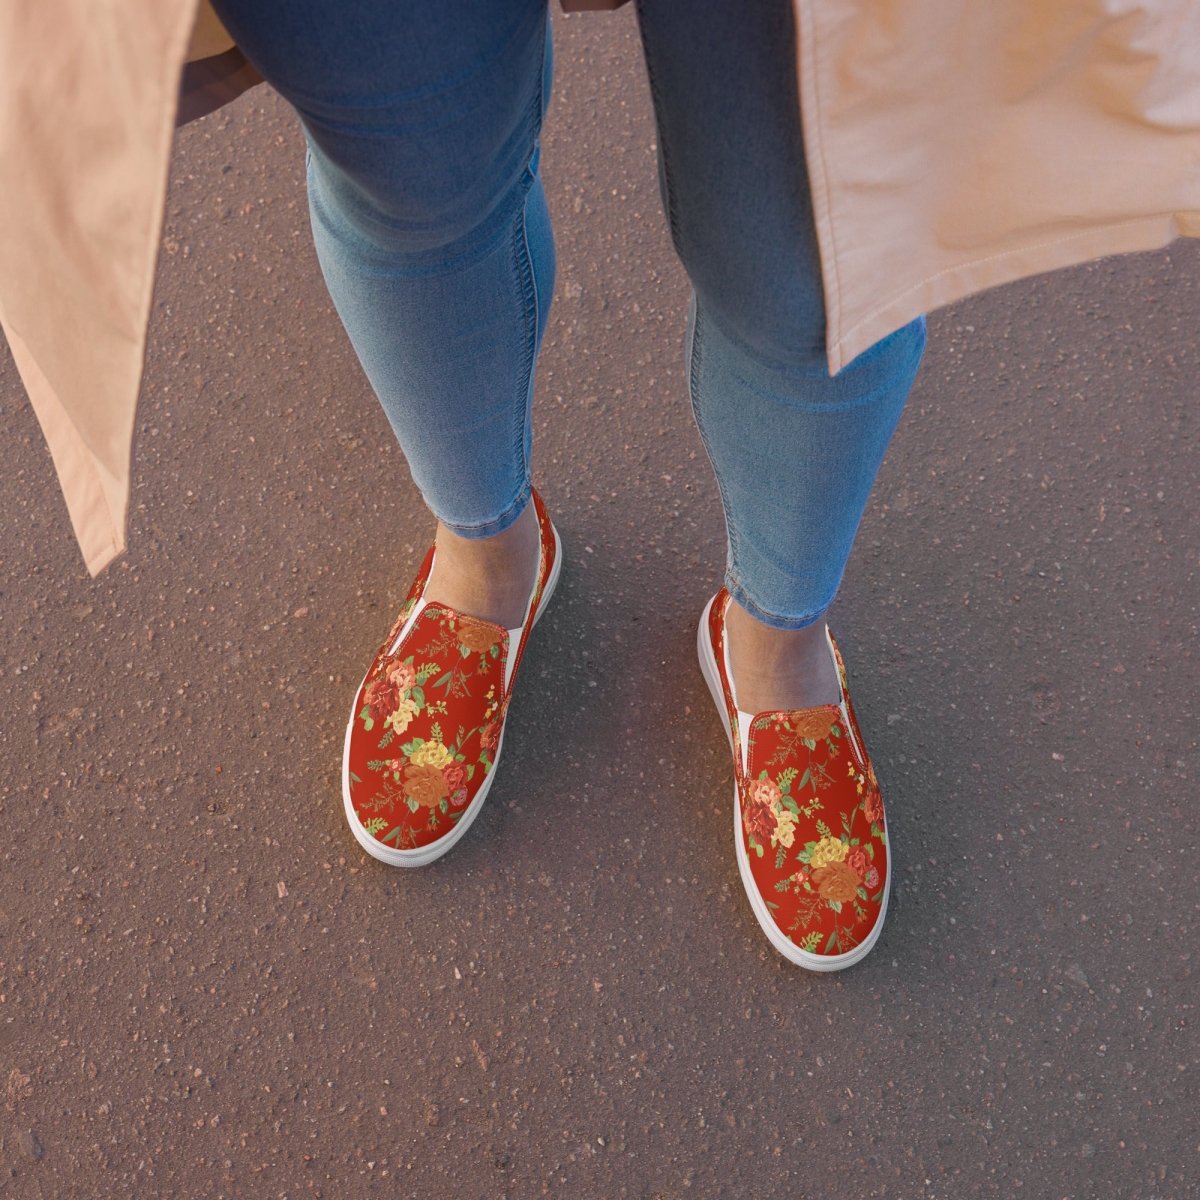 Red Floral Women’s Slip-On Shoes - DoggyLoveandMore